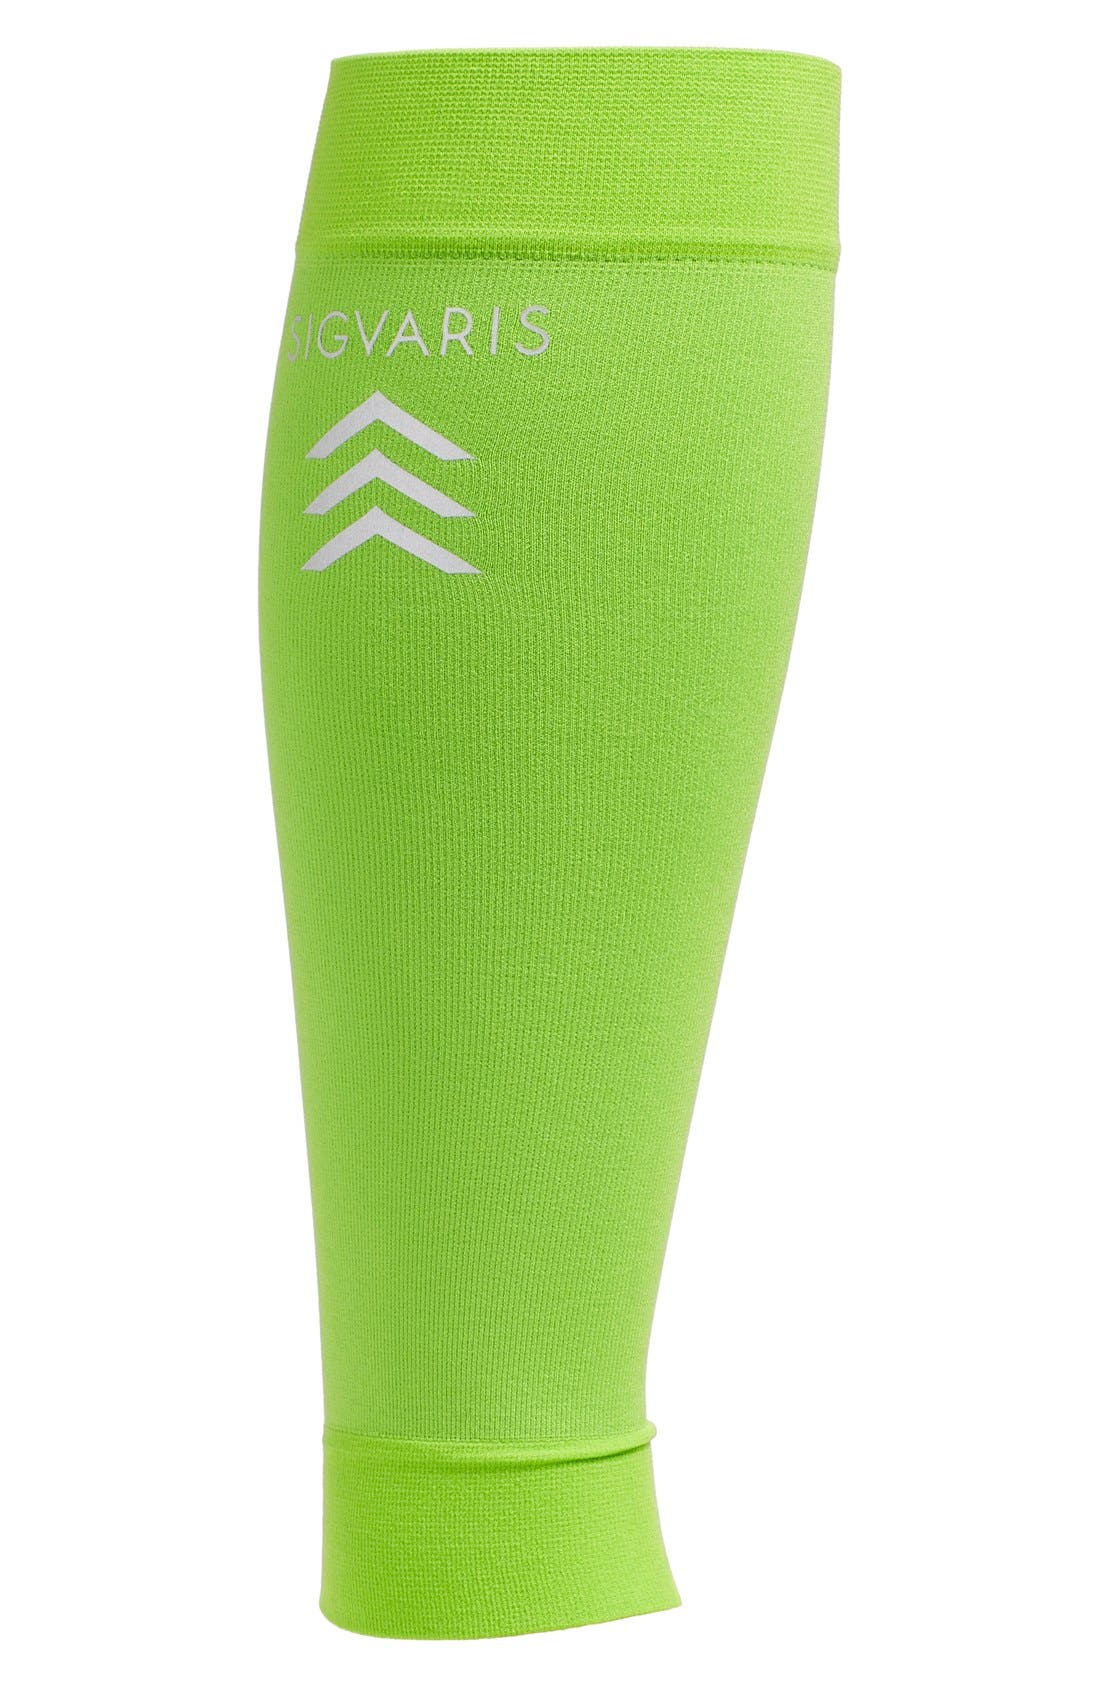 UPC 745129213824 product image for Men's Insignia By Sigvaris 'Sports' Graduated Compression Performance Calf Sleev | upcitemdb.com